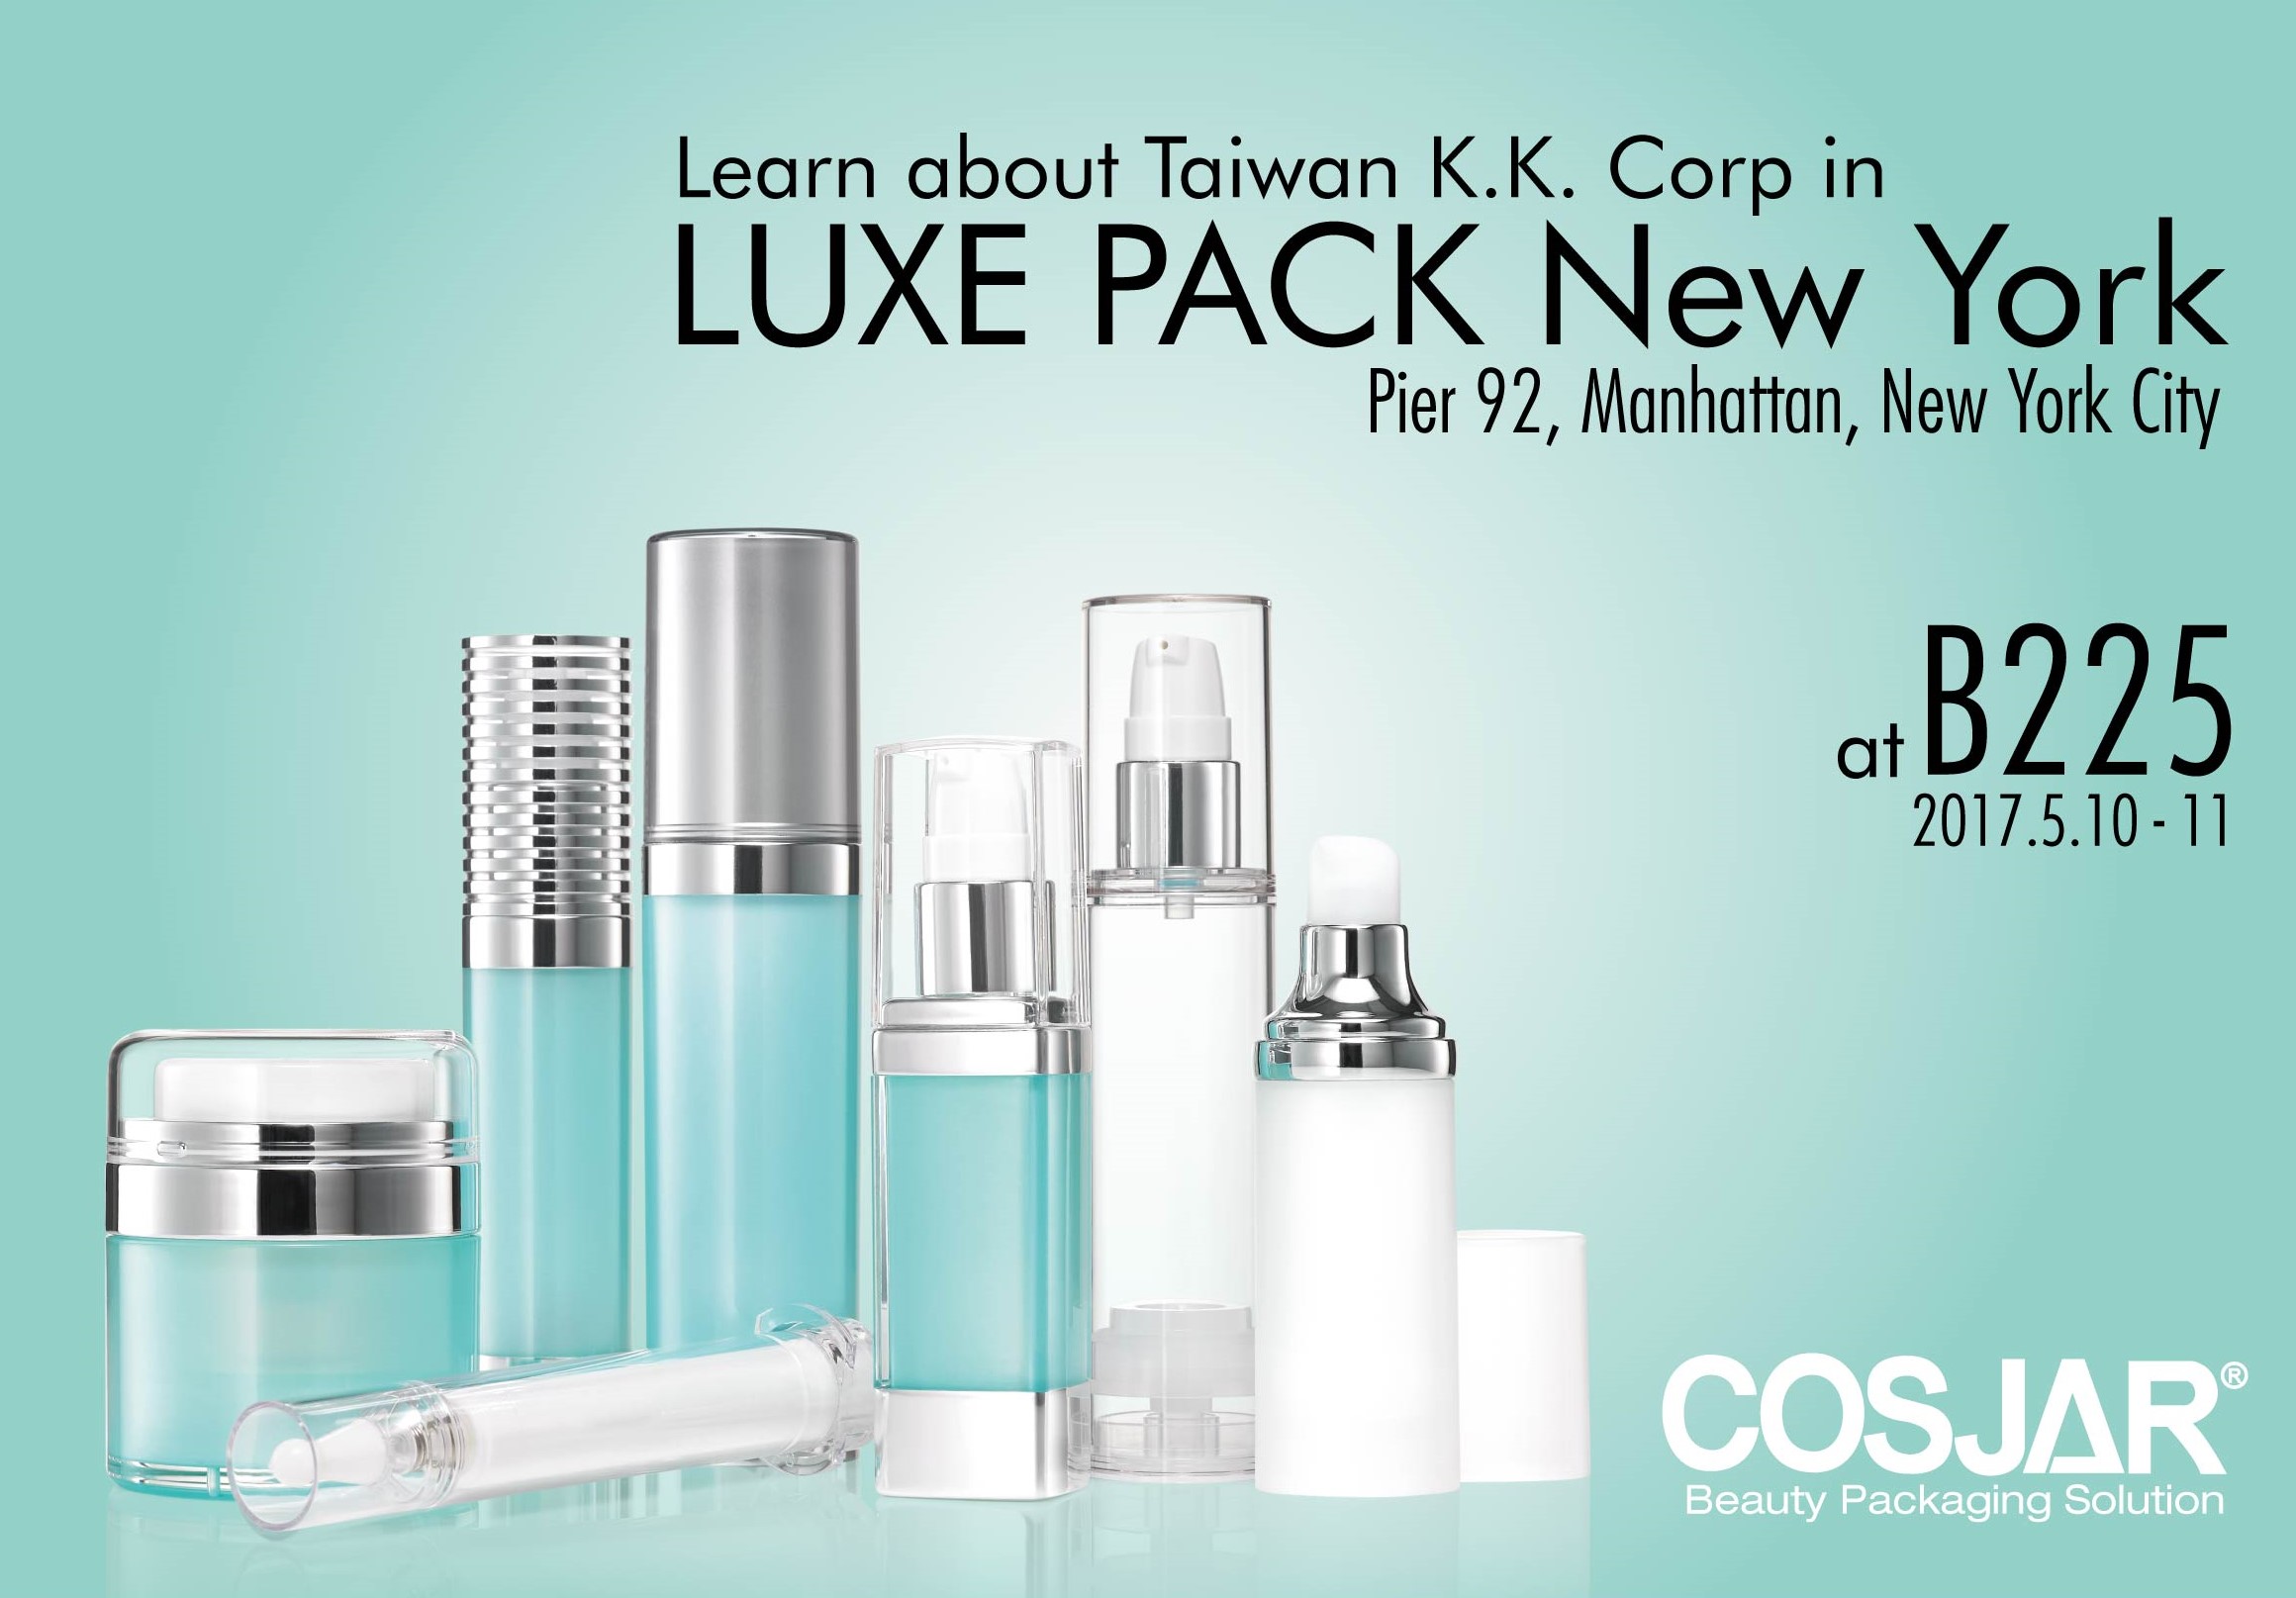 Luxe Pack New York 2017 COSJAR Exhibitions and Events Taiwan K. K